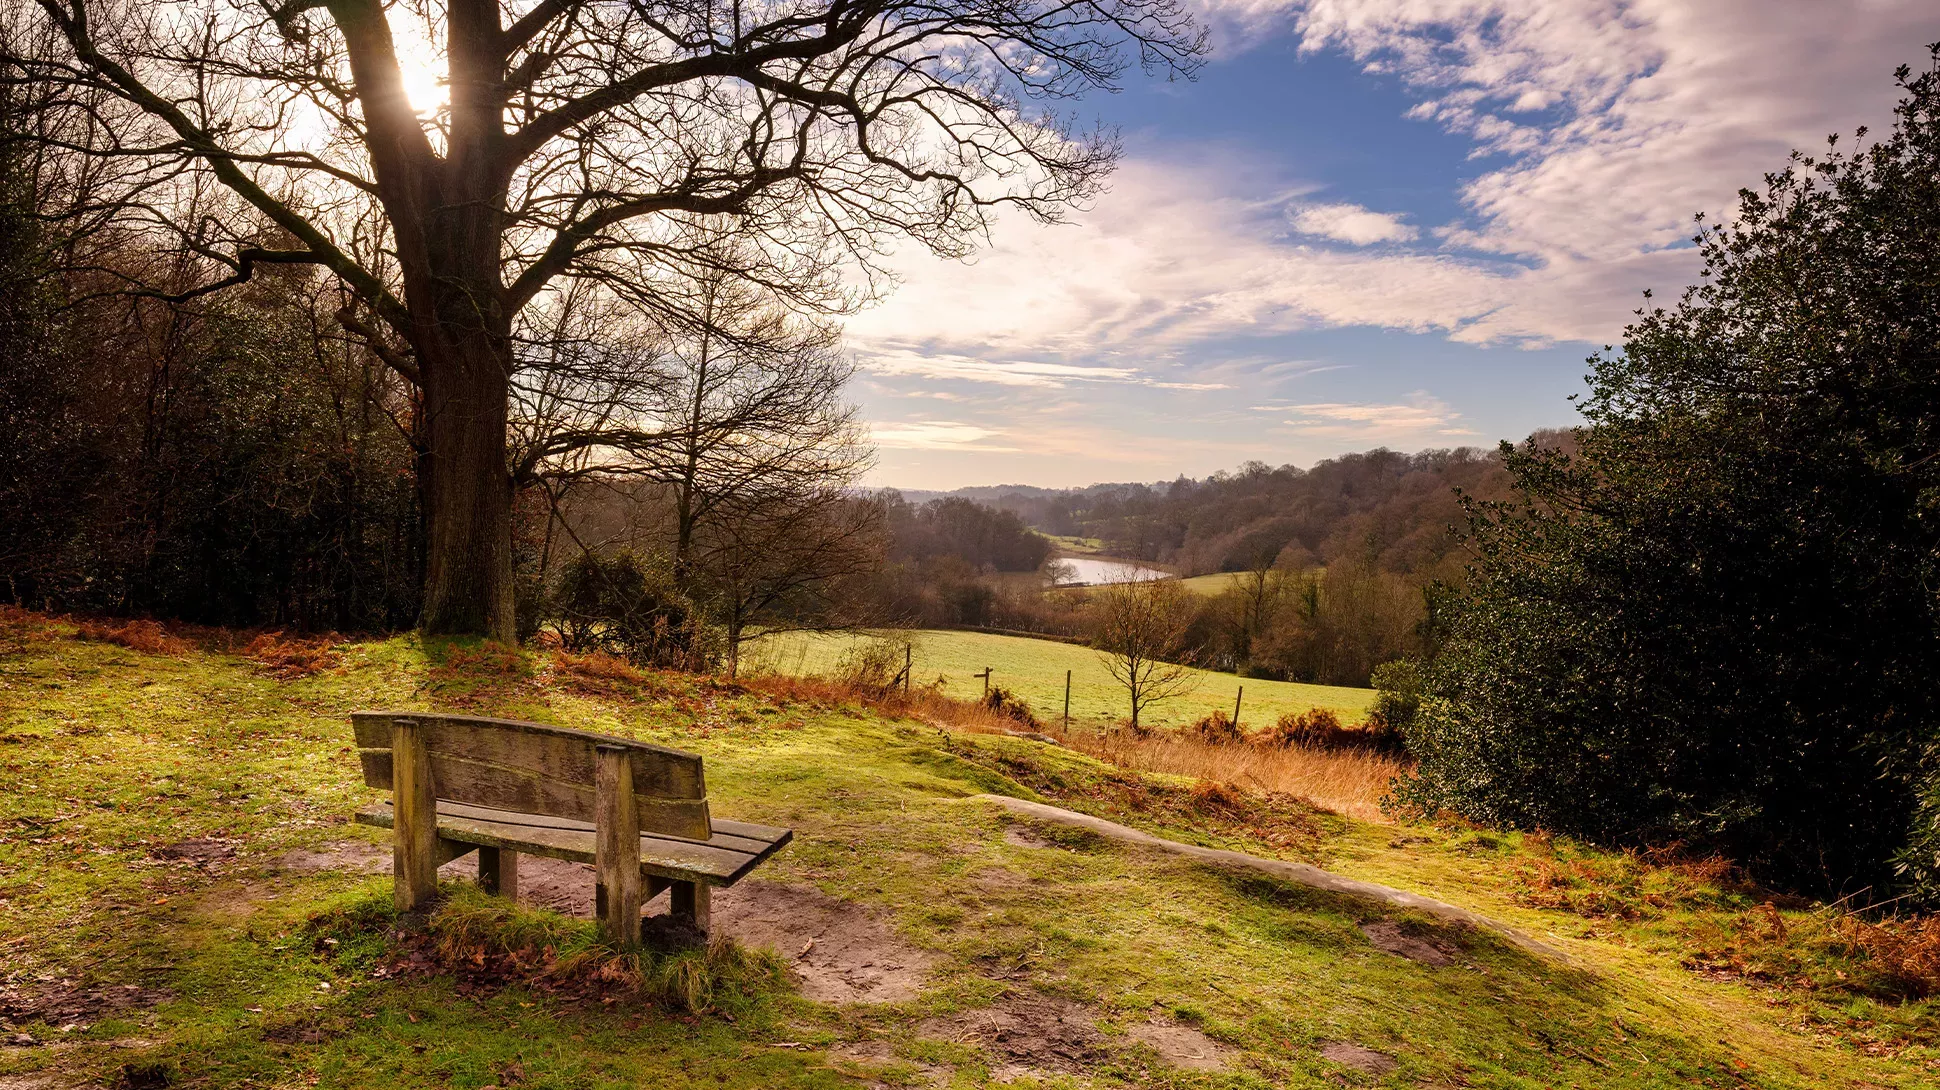 A bench overlooks an expansive valley, with a river running through and hills covered in trees.